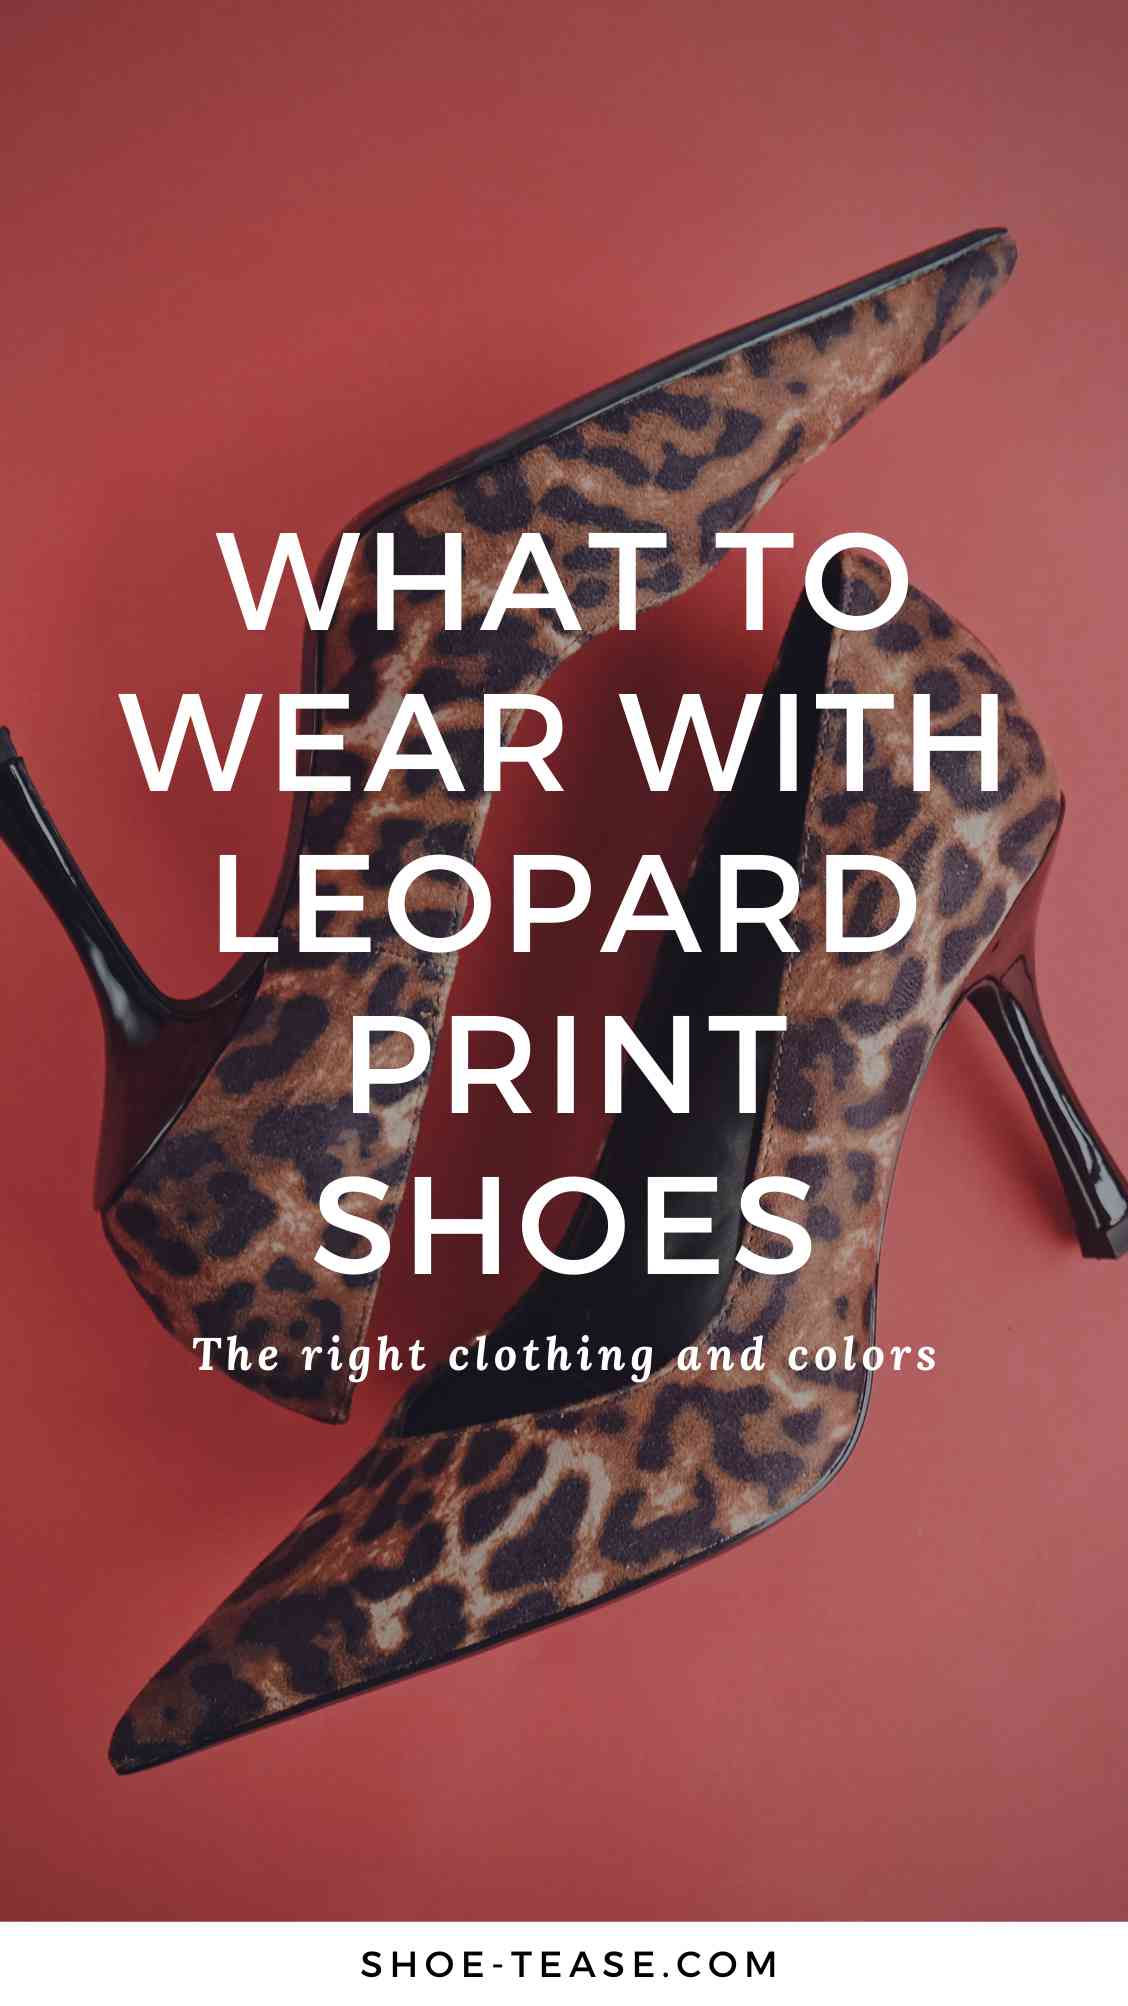 What To Wear With Leopard Print Shoes Cheetah 20 Great Outfit Ideas ...